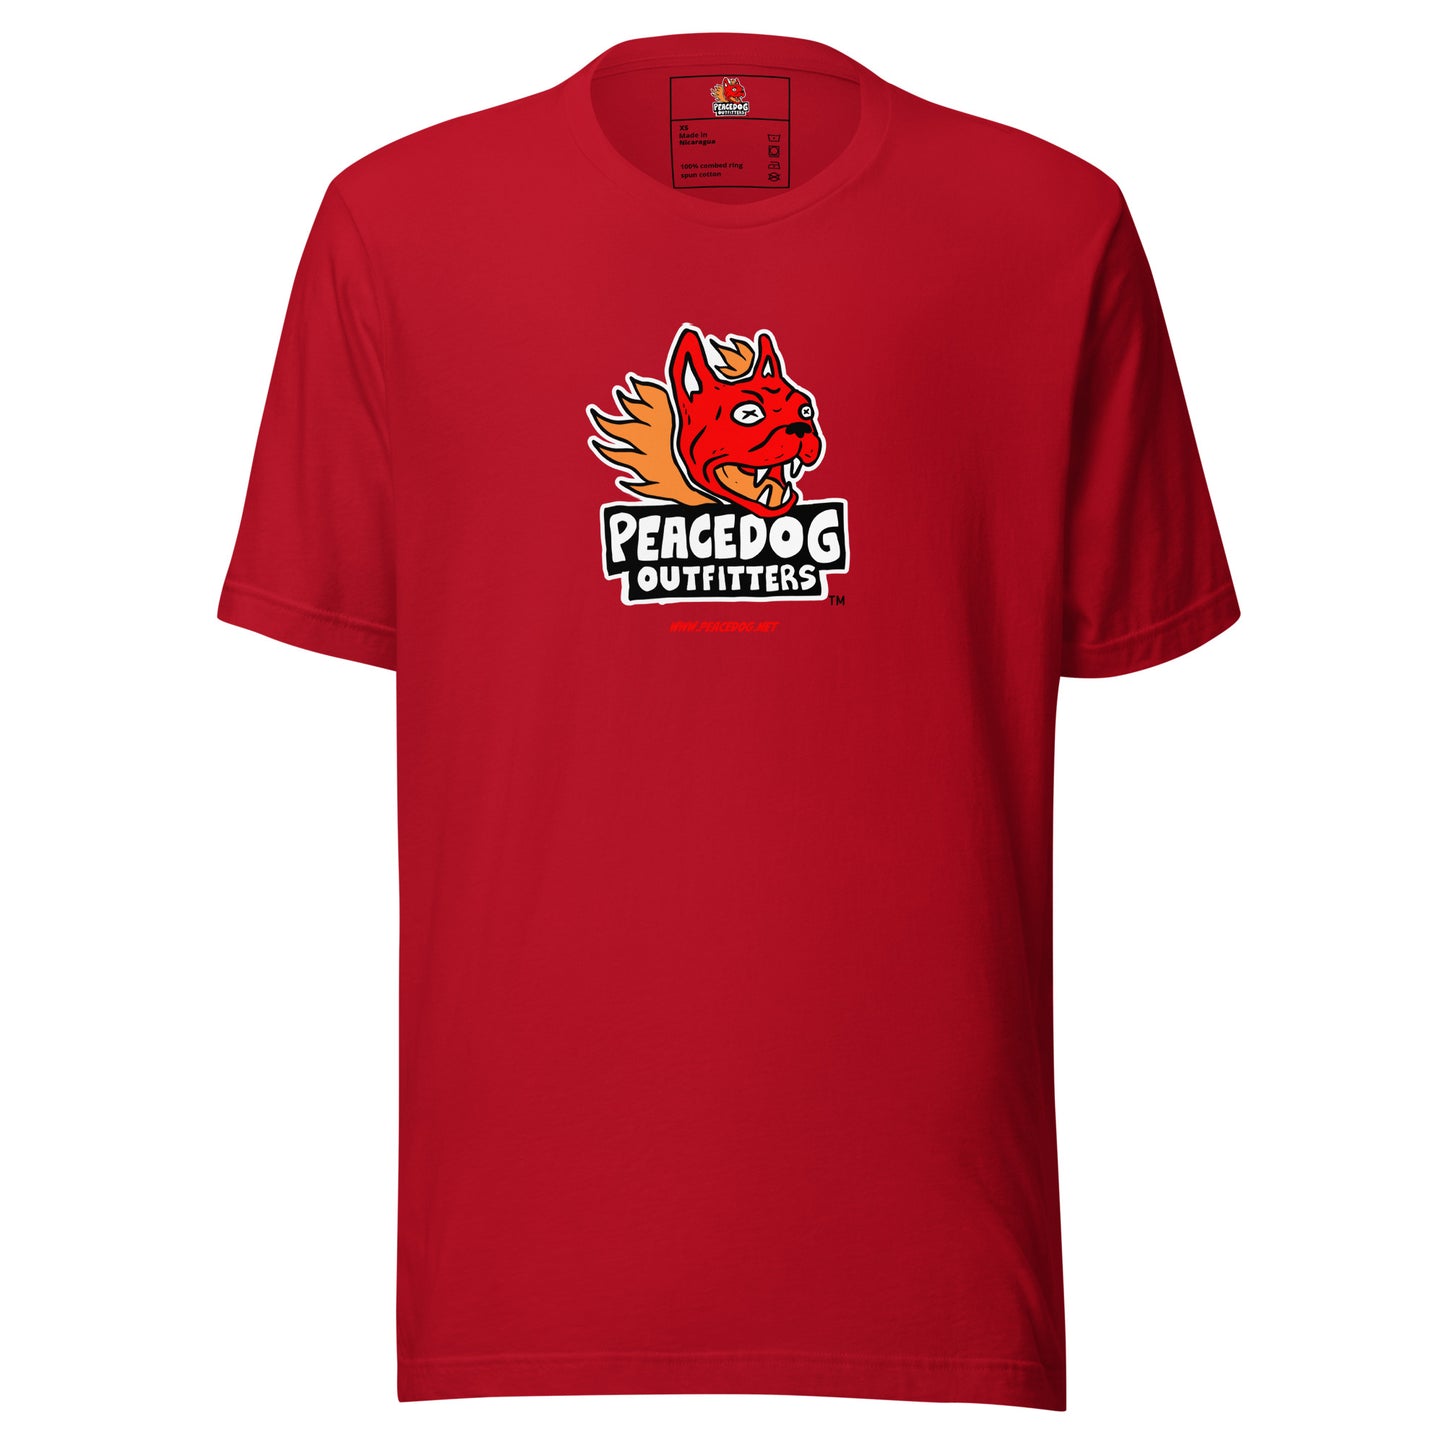 Peacedog Outfitters T-shirt